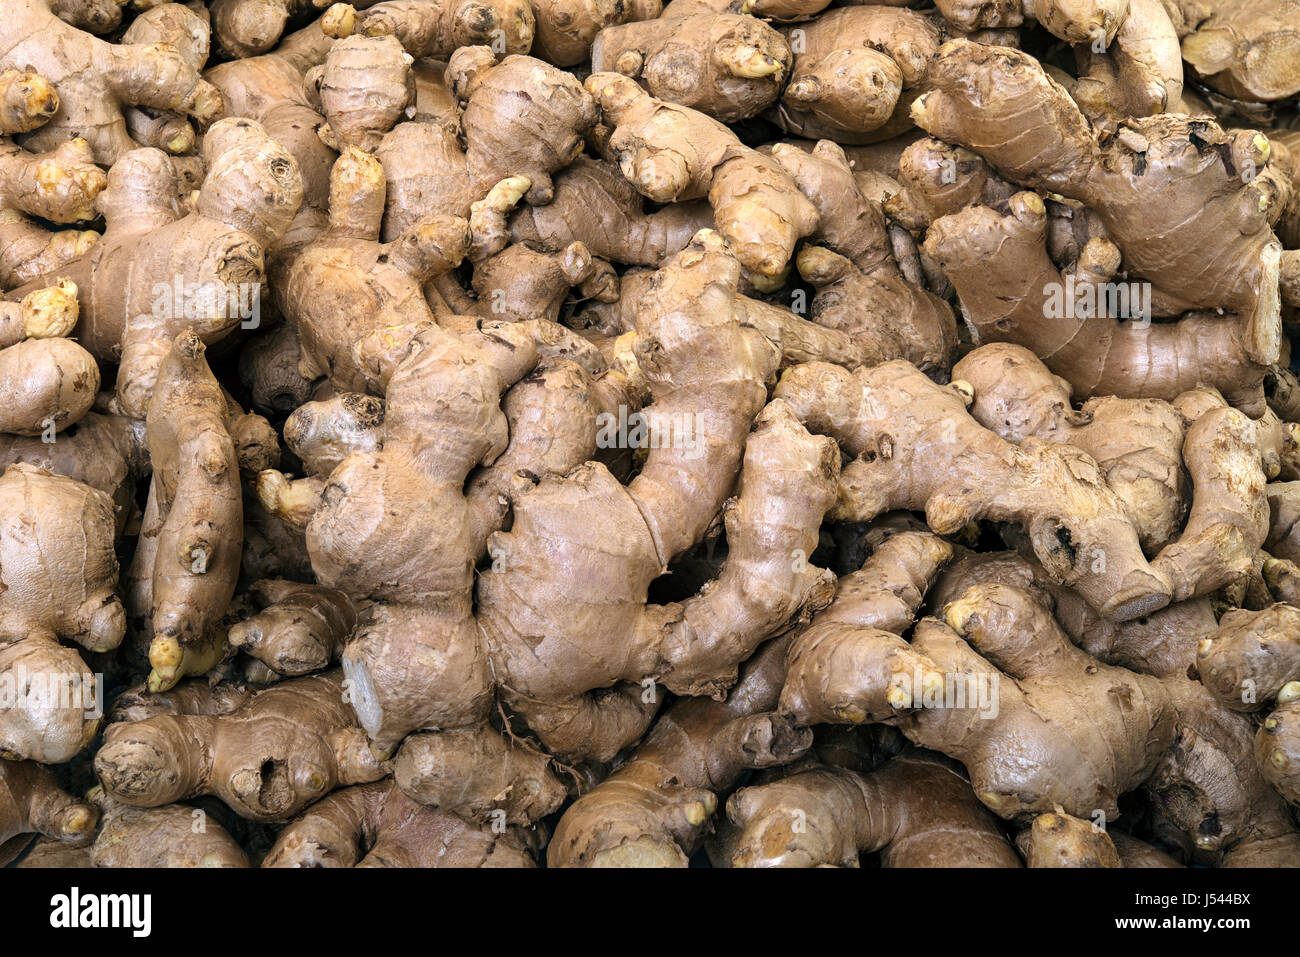 Organic ginger on display for sale in the fresh vegetable market Stock Photo